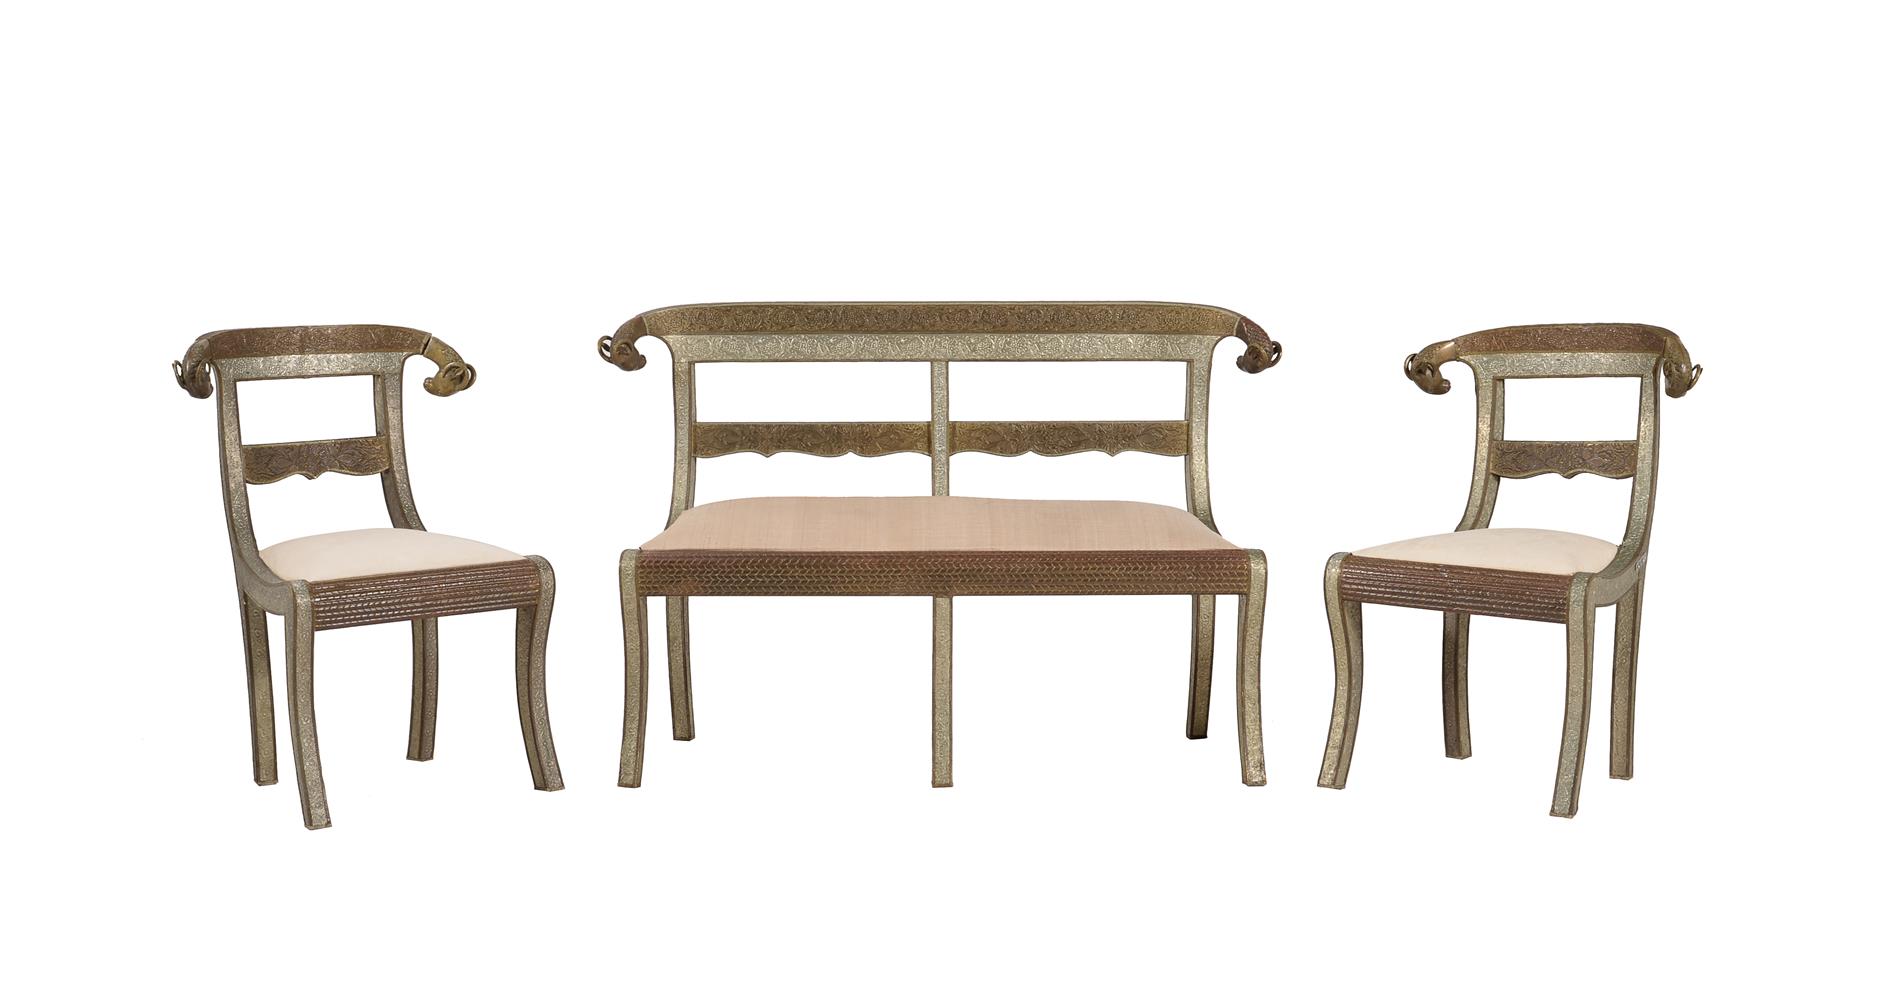 A suite of Indian gilt and silver coloured metal seat furniture